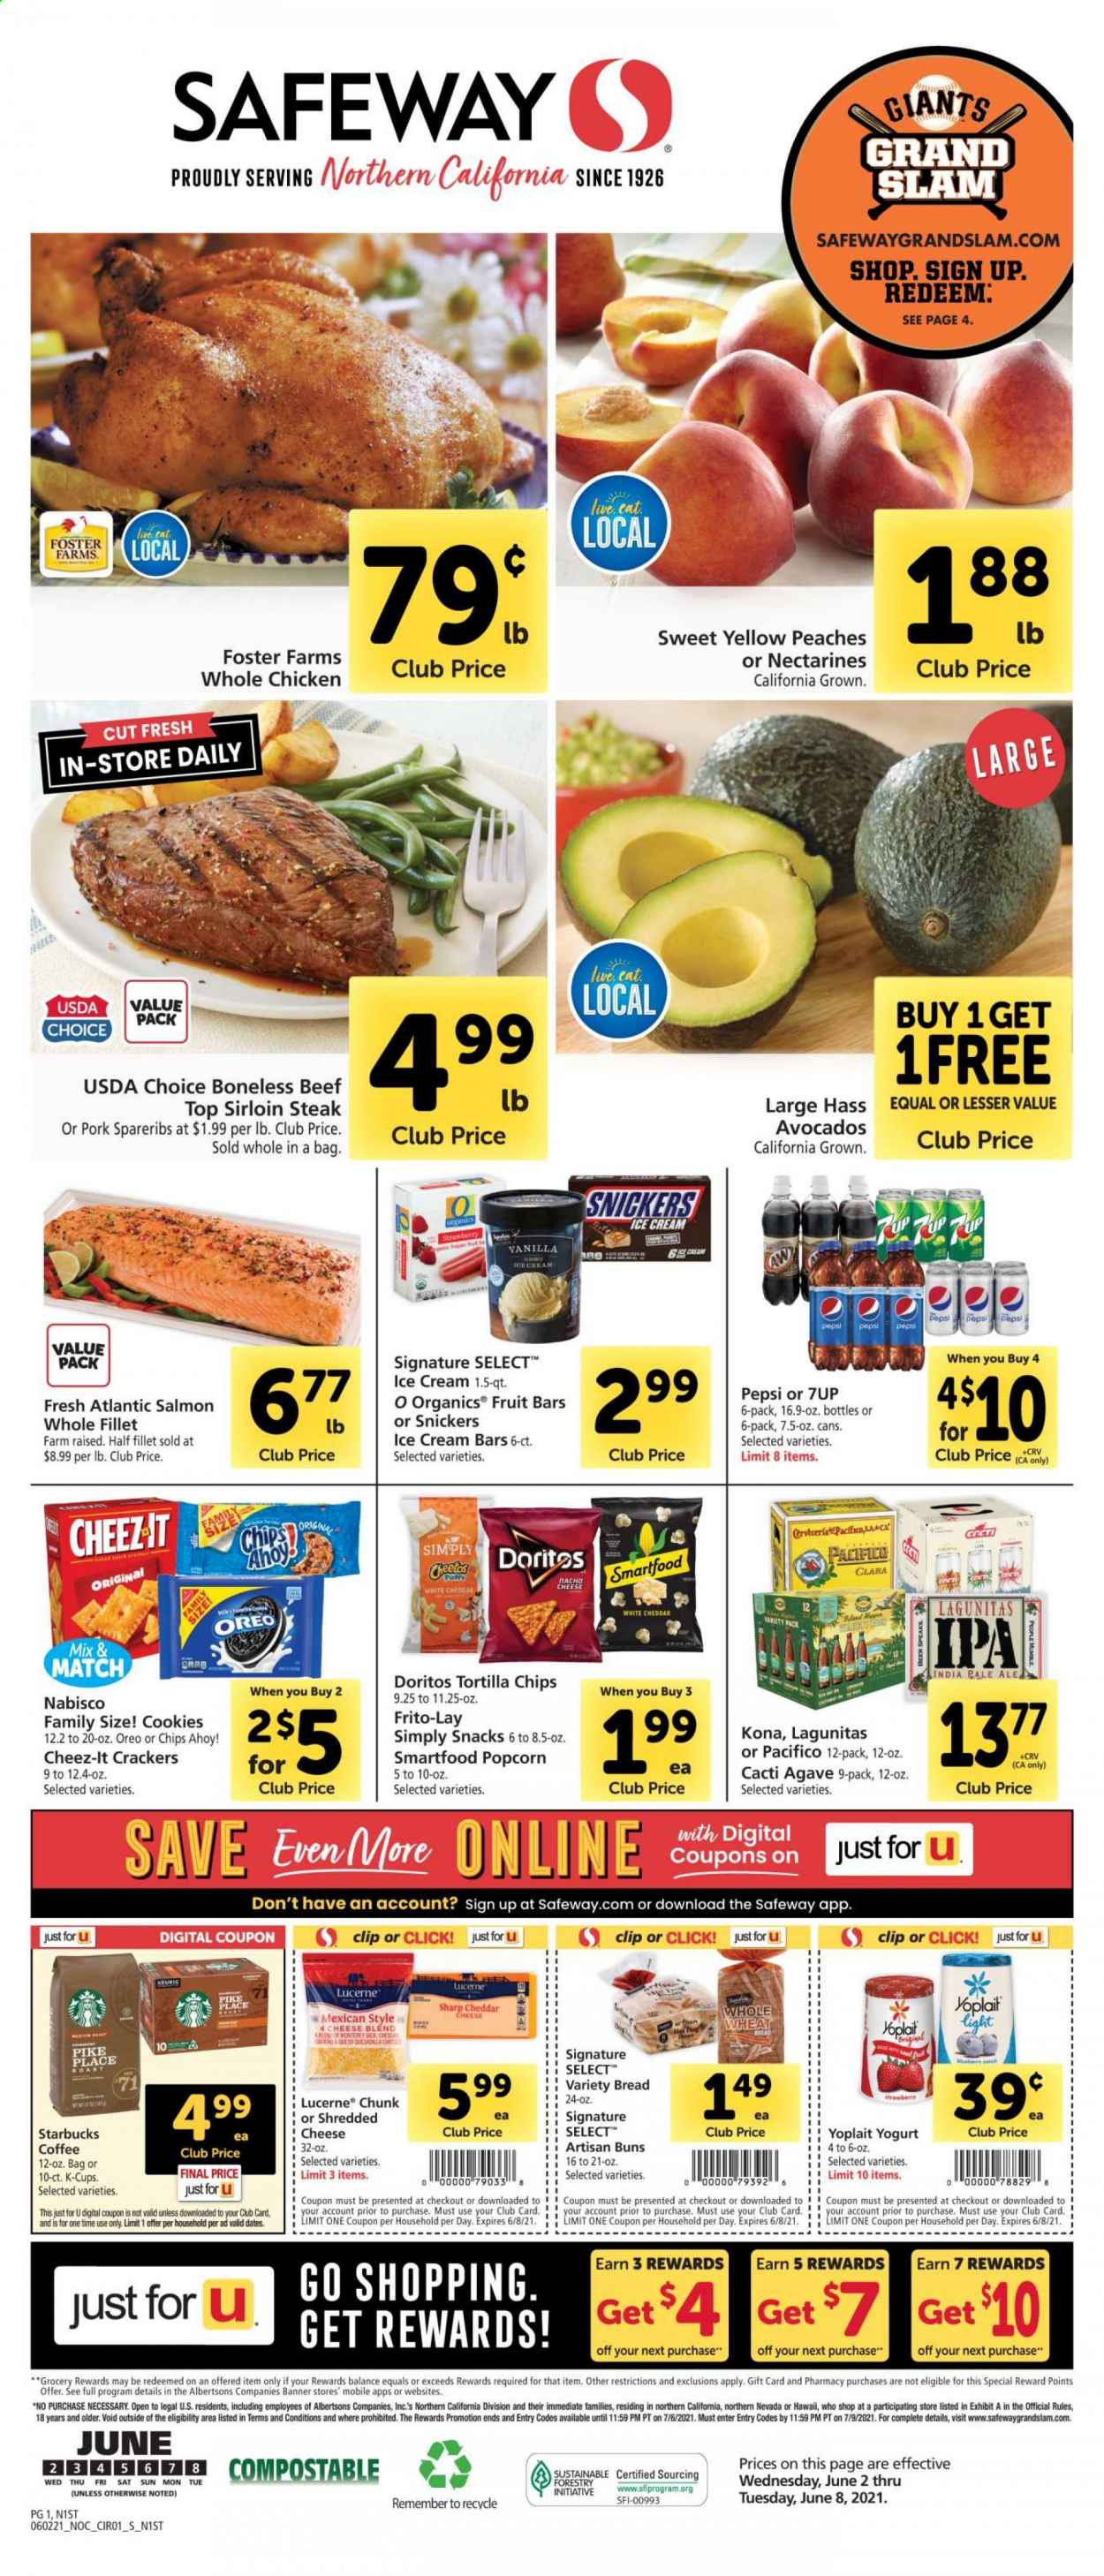 thumbnail - Safeway Flyer - 06/02/2021 - 06/08/2021 - Sales products - wheat bread, buns, avocado, whole chicken, beef sirloin, steak, sirloin steak, pork spare ribs, salmon, shredded cheese, yoghurt, Yoplait, ice cream, ice cream bars, cookies, snack, Snickers, crackers, Chips Ahoy!, Doritos, tortilla chips, chips, Smartfood, popcorn, Frito-Lay, Cheez-It, Pepsi, 7UP, coffee, Starbucks, coffee capsules, K-Cups, beer, IPA, pen, nectarines, peaches. Page 1.